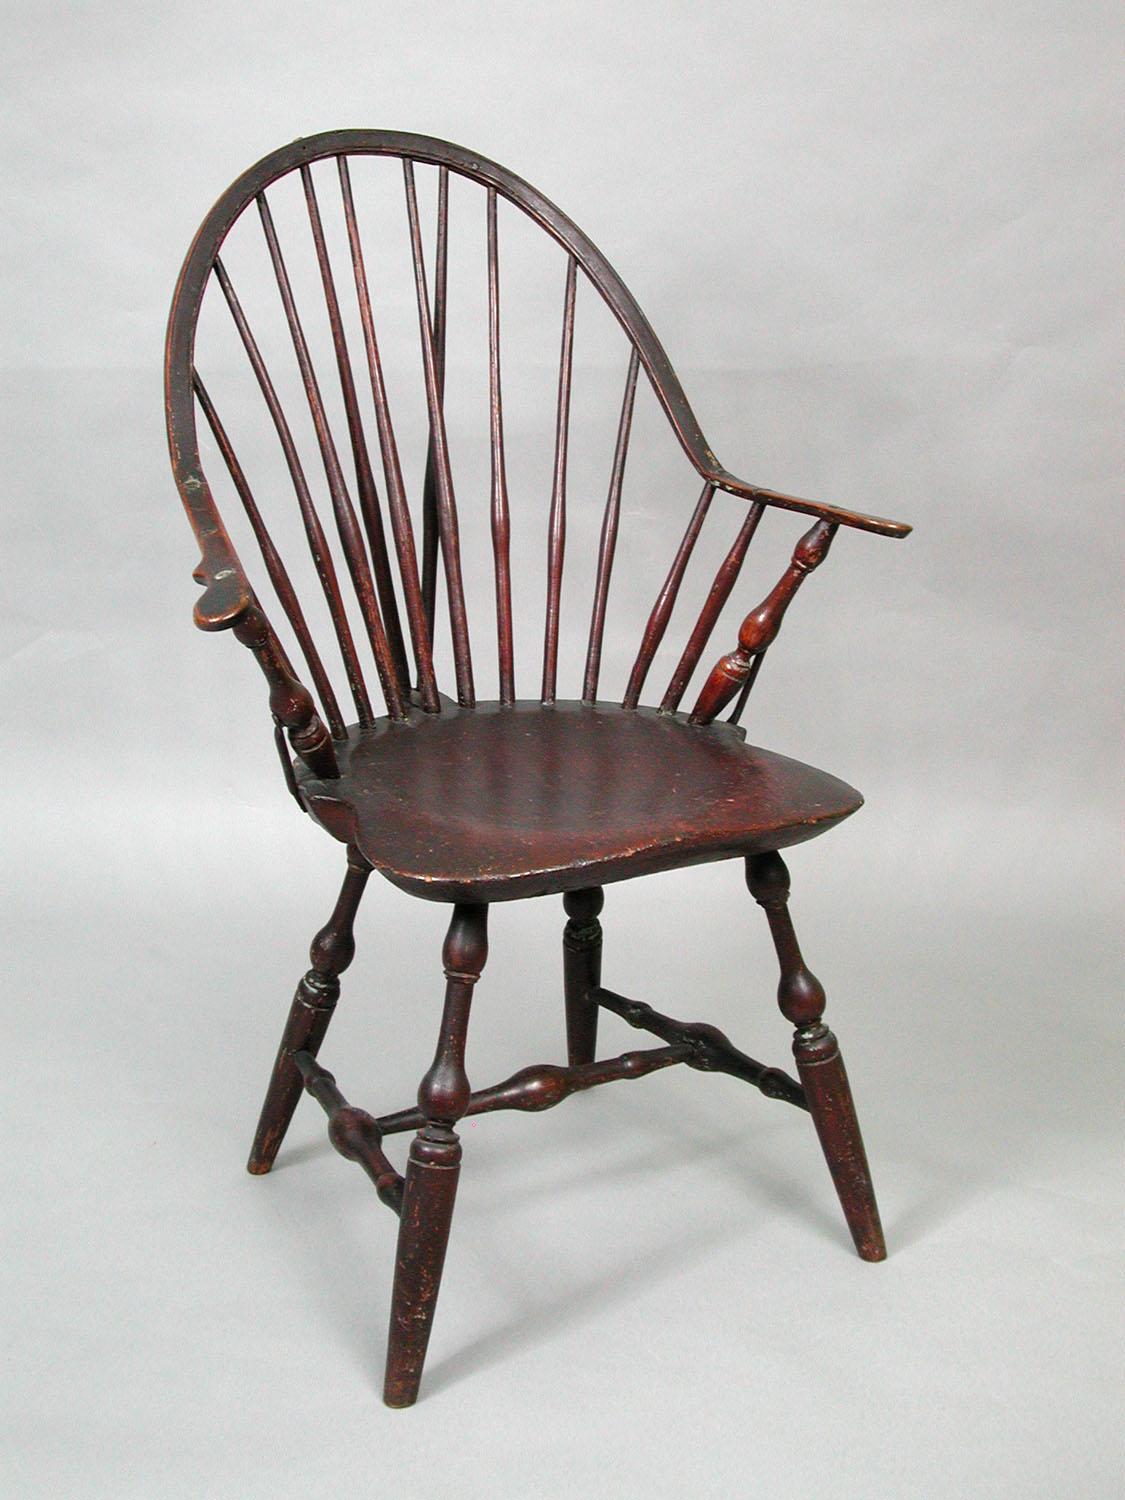 American Chairs, Made in Connecticut | Connecticut Public Radio